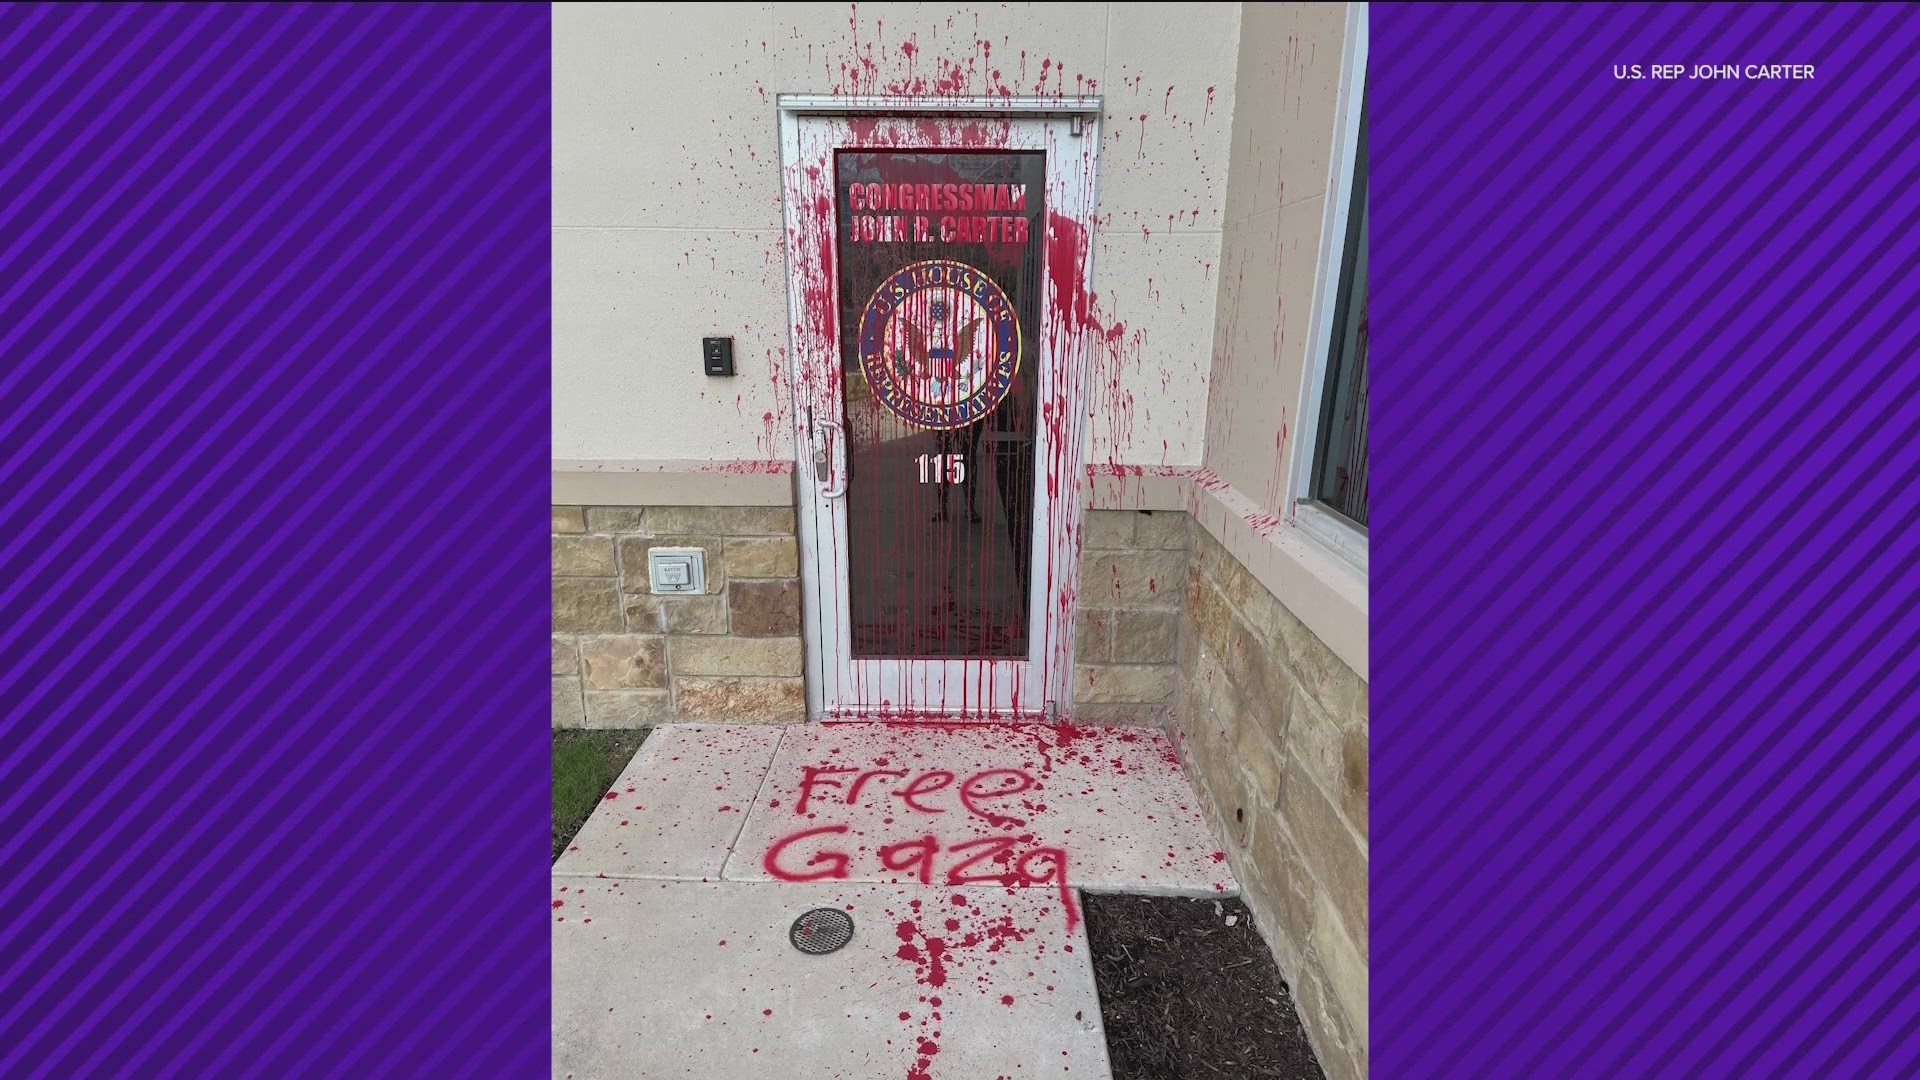 An investigation is underway looking into who vandalized a U.S. congressman's office in Georgetown.